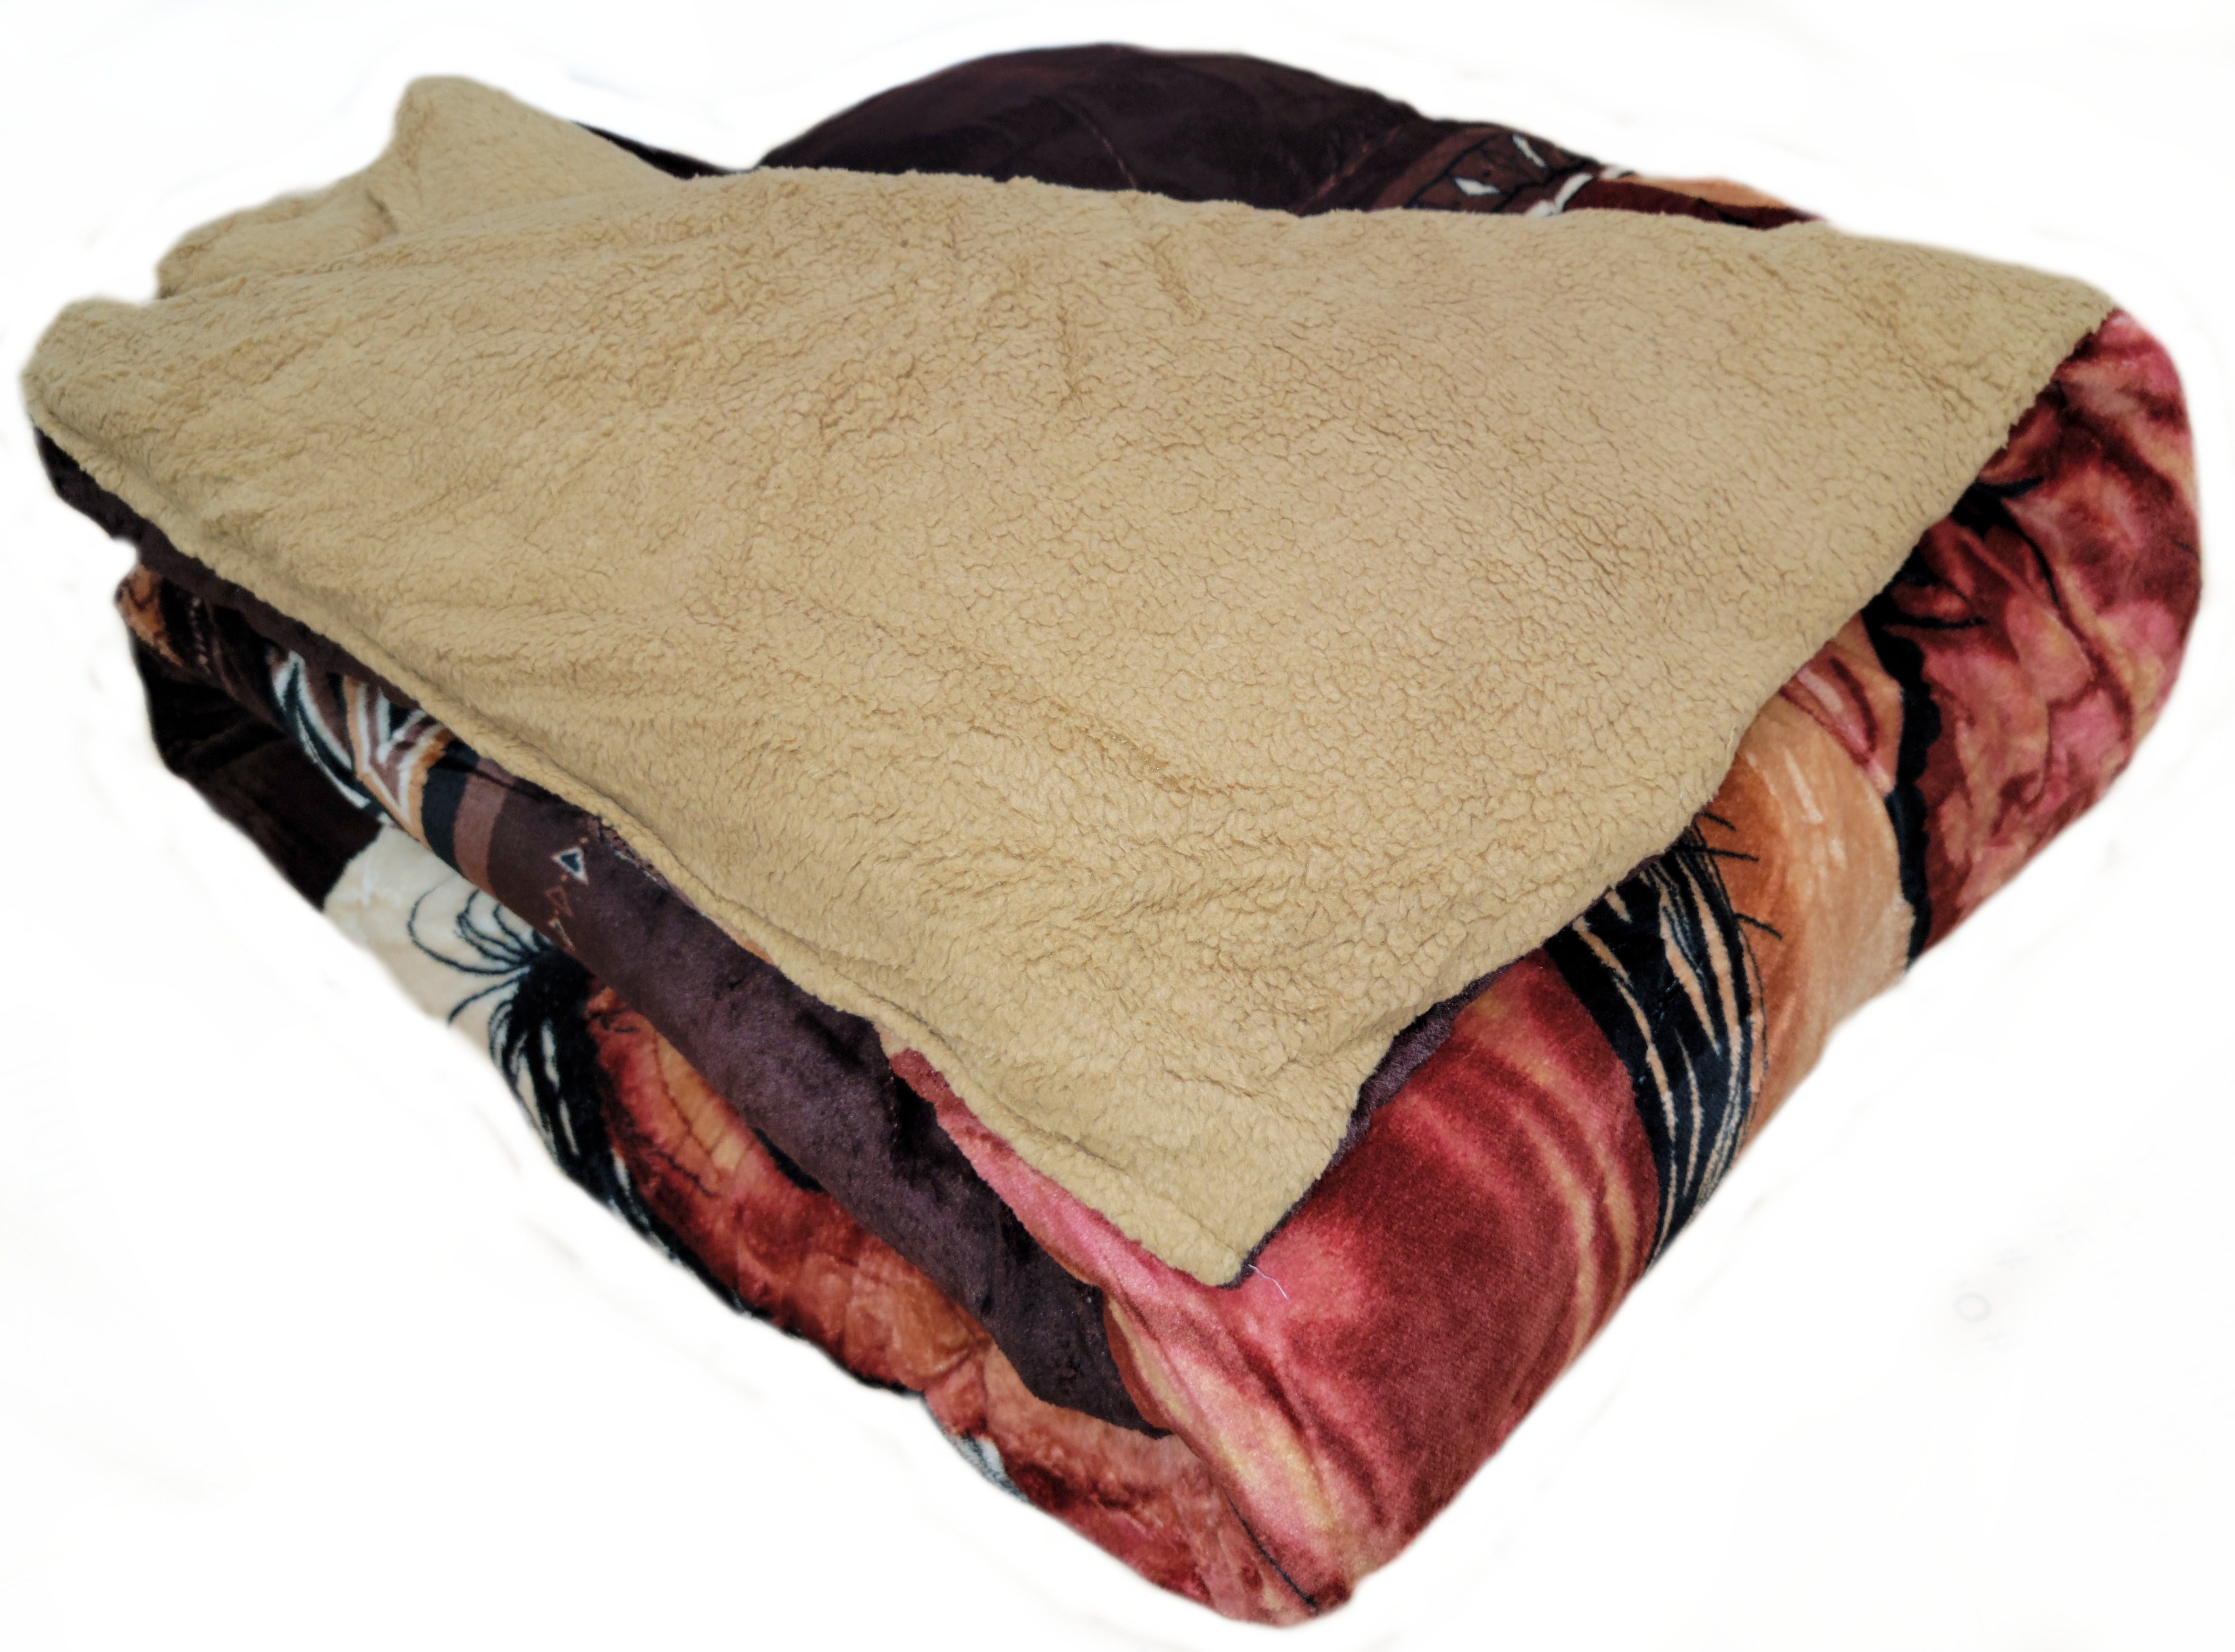 OSAKA 3PC HORSE BORREGO BLANKET FLEECE DOUBLE PLY BLANKET - SUPER SOFT WARM - THICK AND HEAVY PLUSH BLANKET - WITH 2 PILLOW SHAM